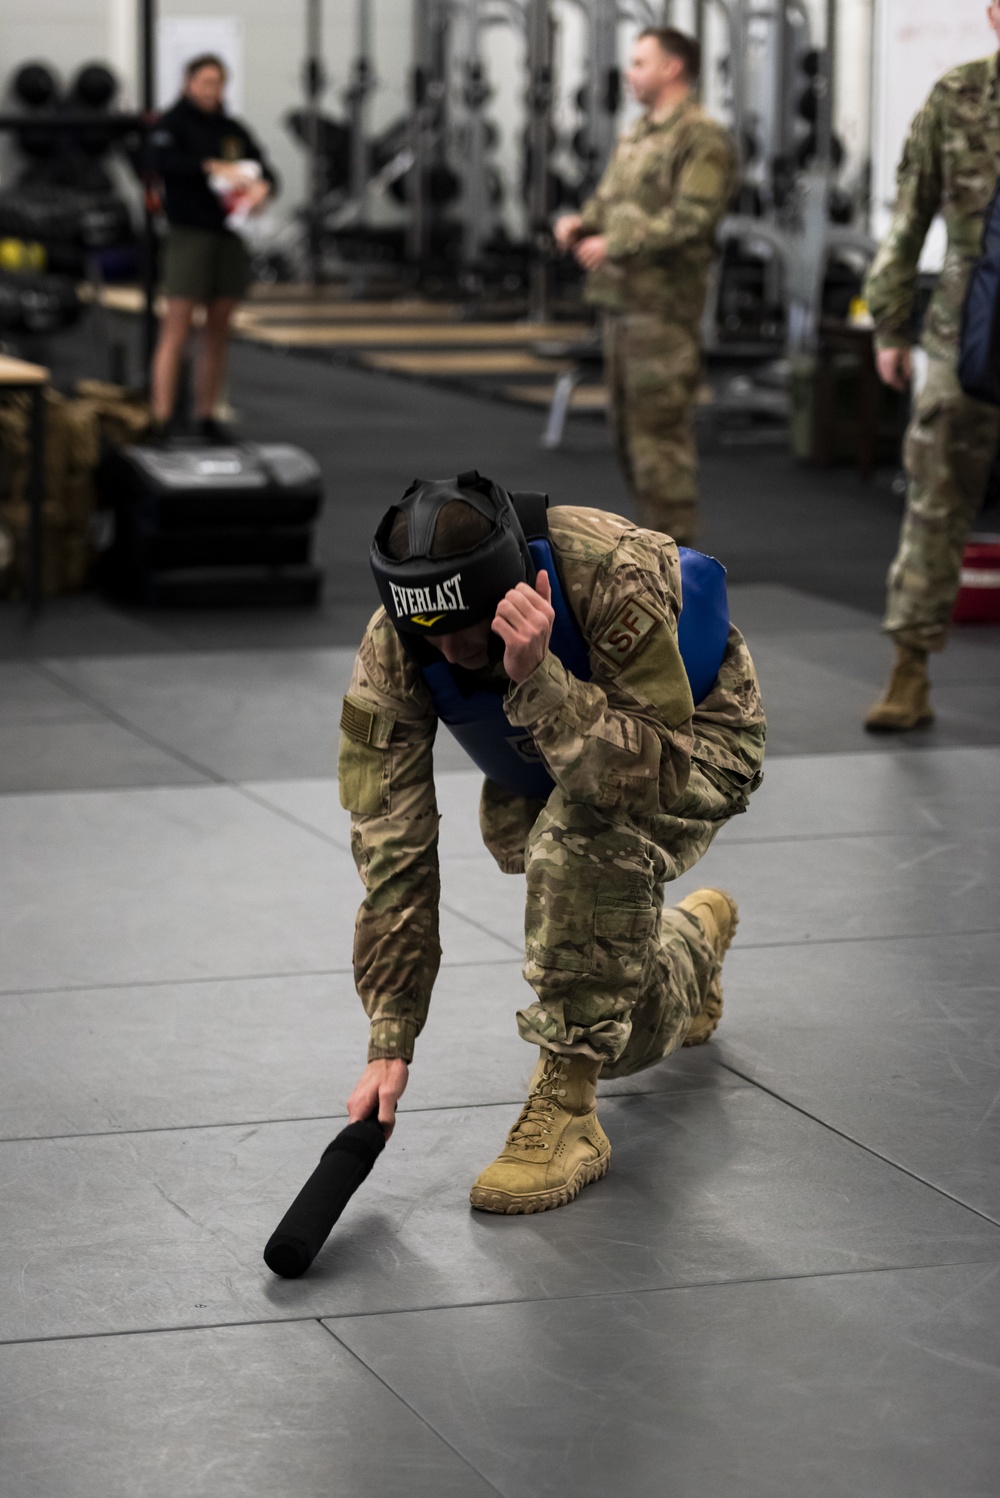 435th SFS bolsters global security